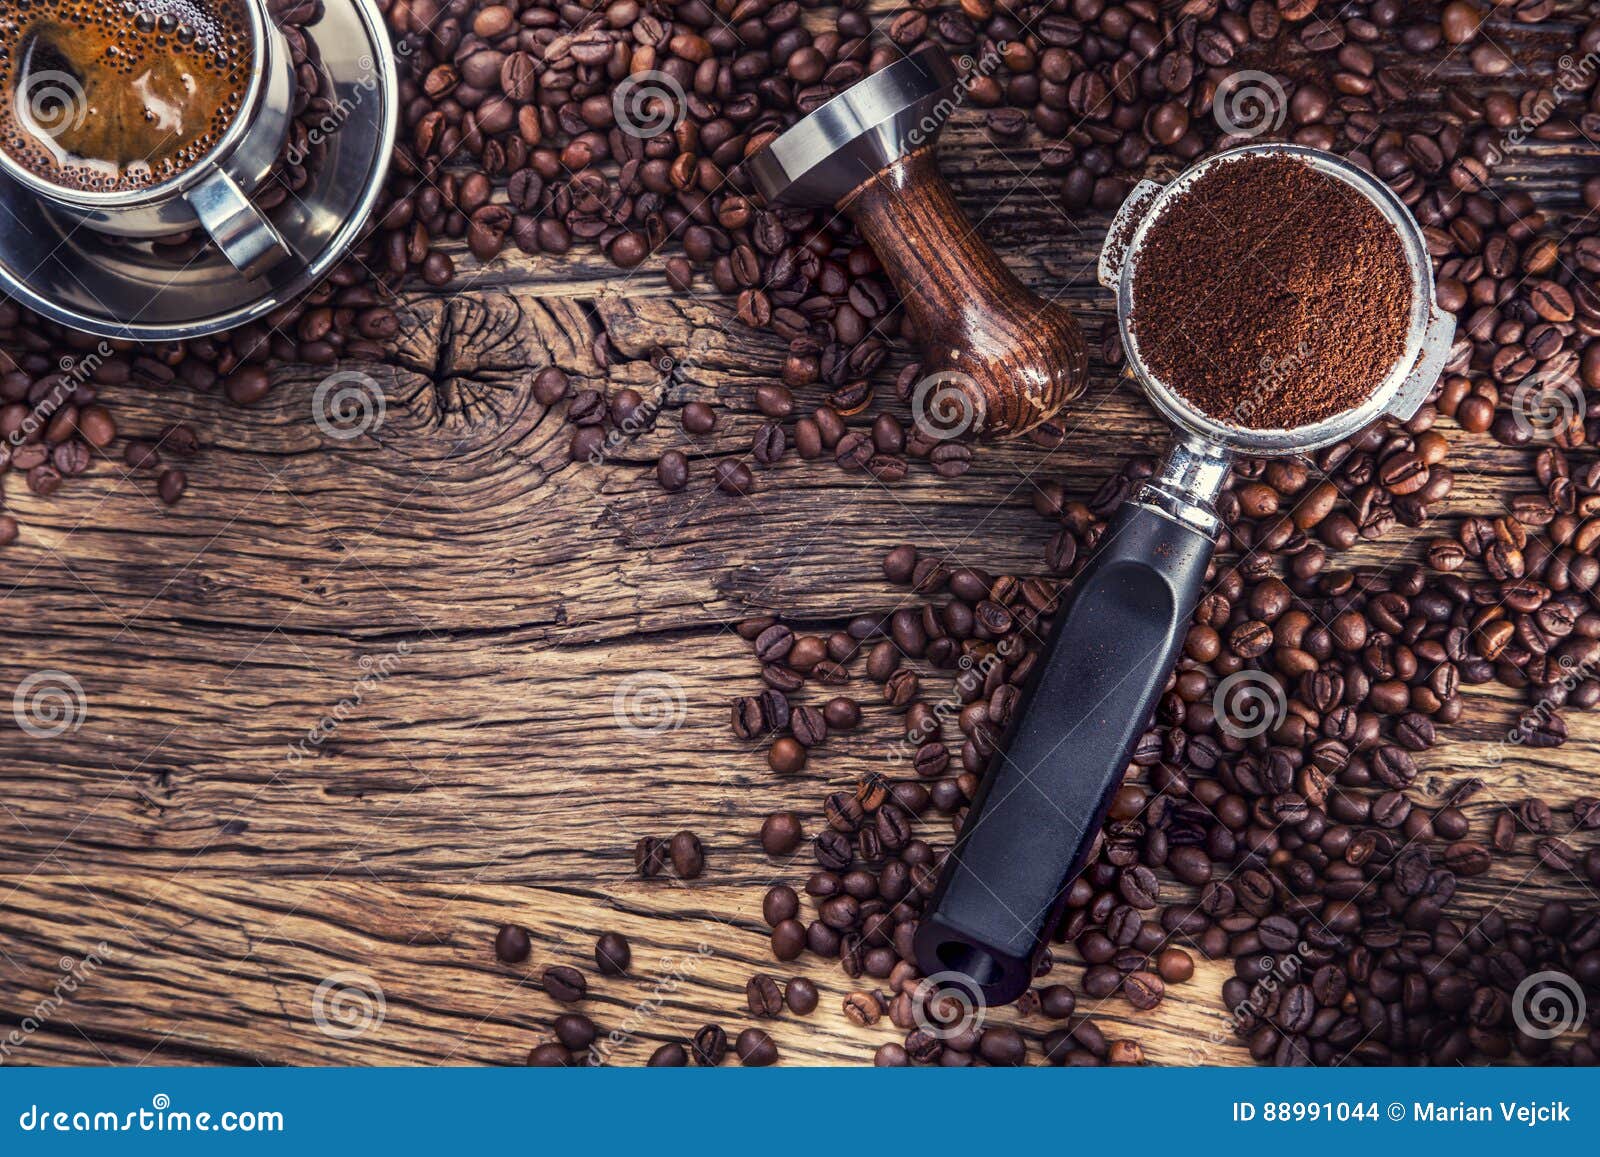 coffee. black coffee with coffee beans and portafilter on old oak wooden table